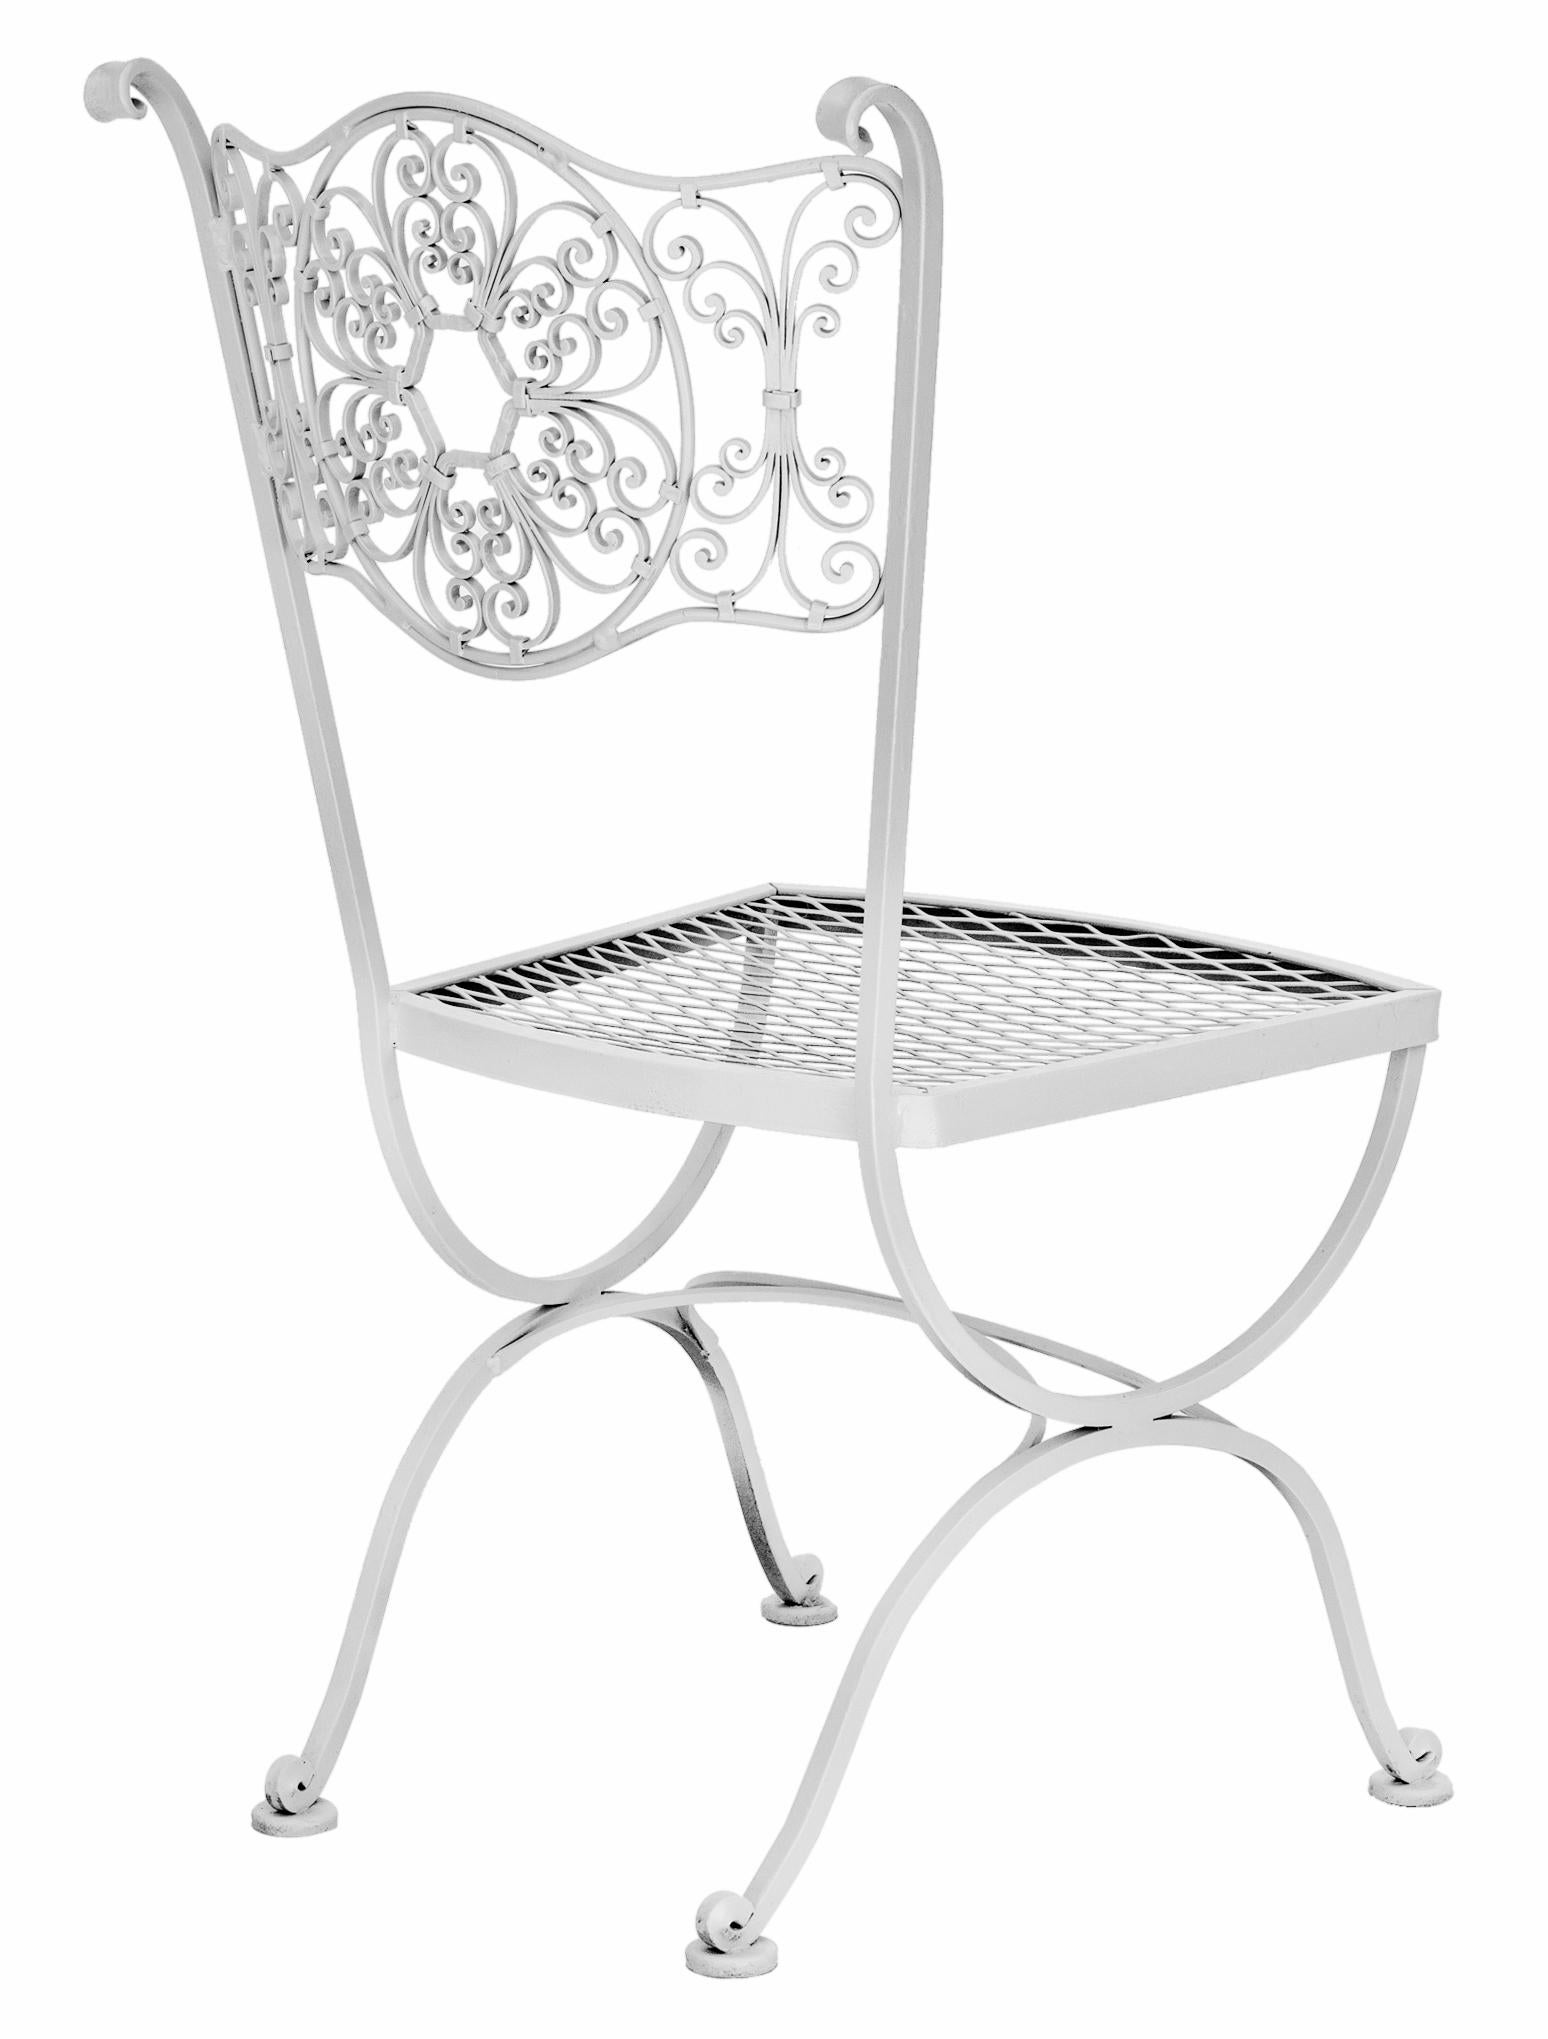  Rare Woodard Andalusian Iron Patio Chairs set/5 In Good Condition For Sale In Malibu, CA